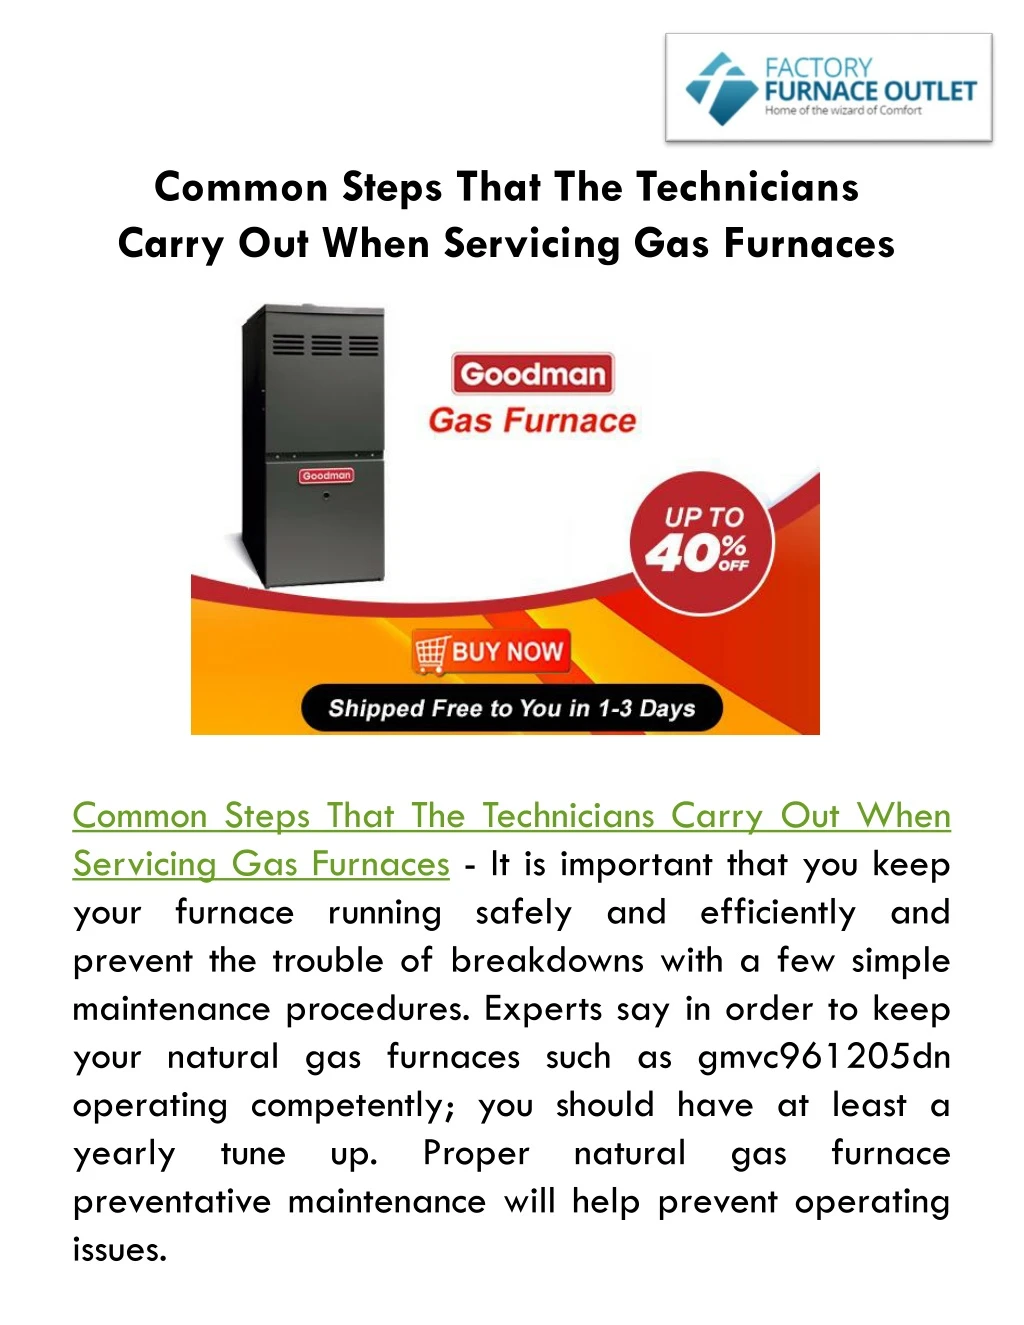 common steps that the technicians carry out when